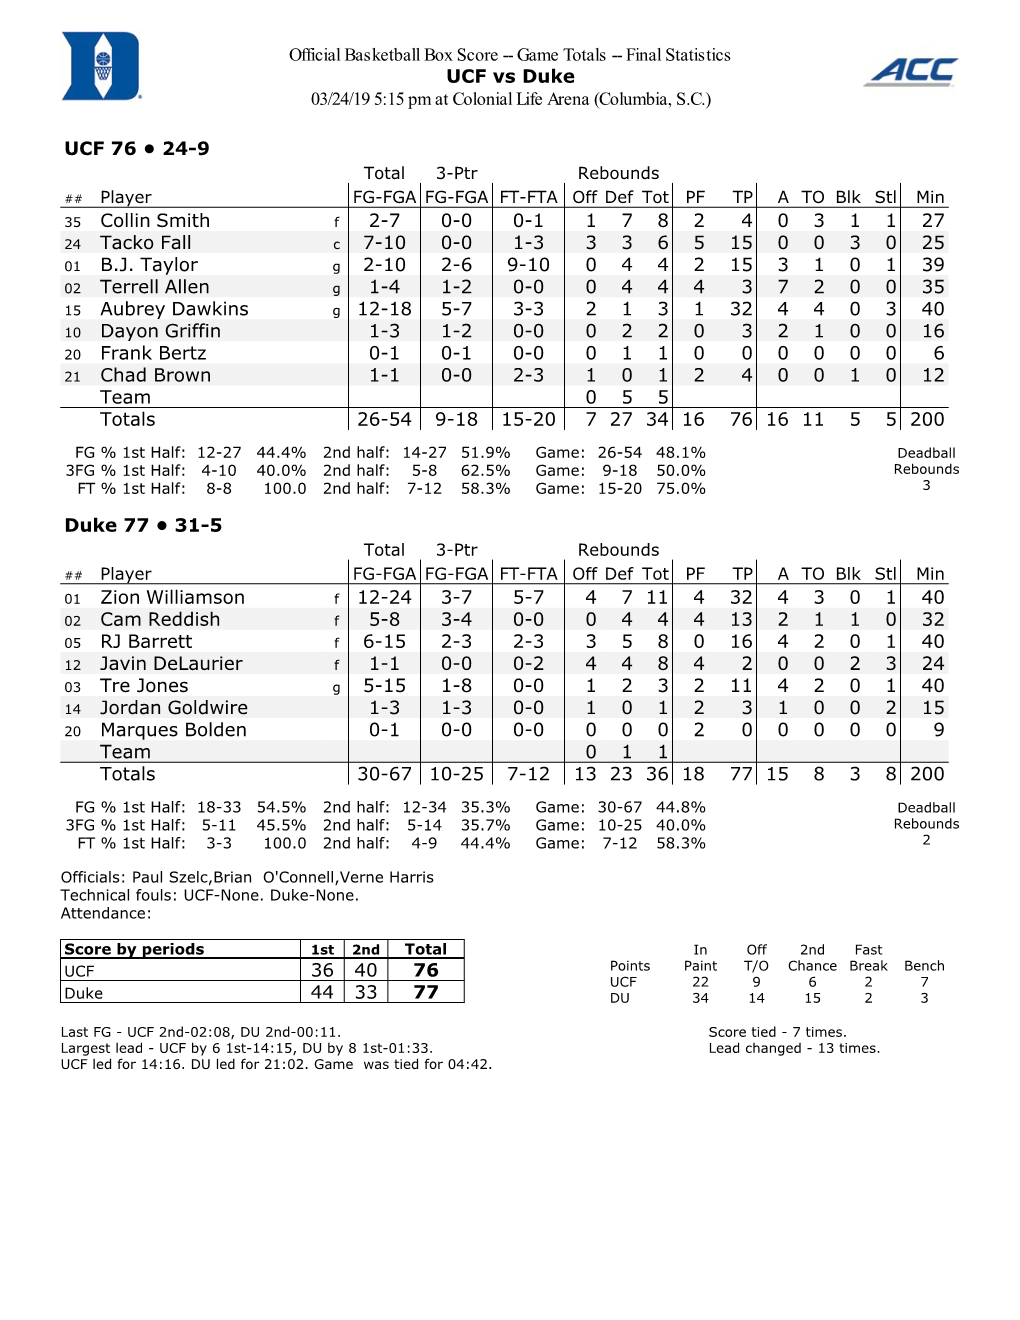 Official Basketball Box Score -- Game Totals -- Final Statistics UCF Vs Duke 03/24/19 5:15 Pm at Colonial Life Arena (Columbia, S.C.)